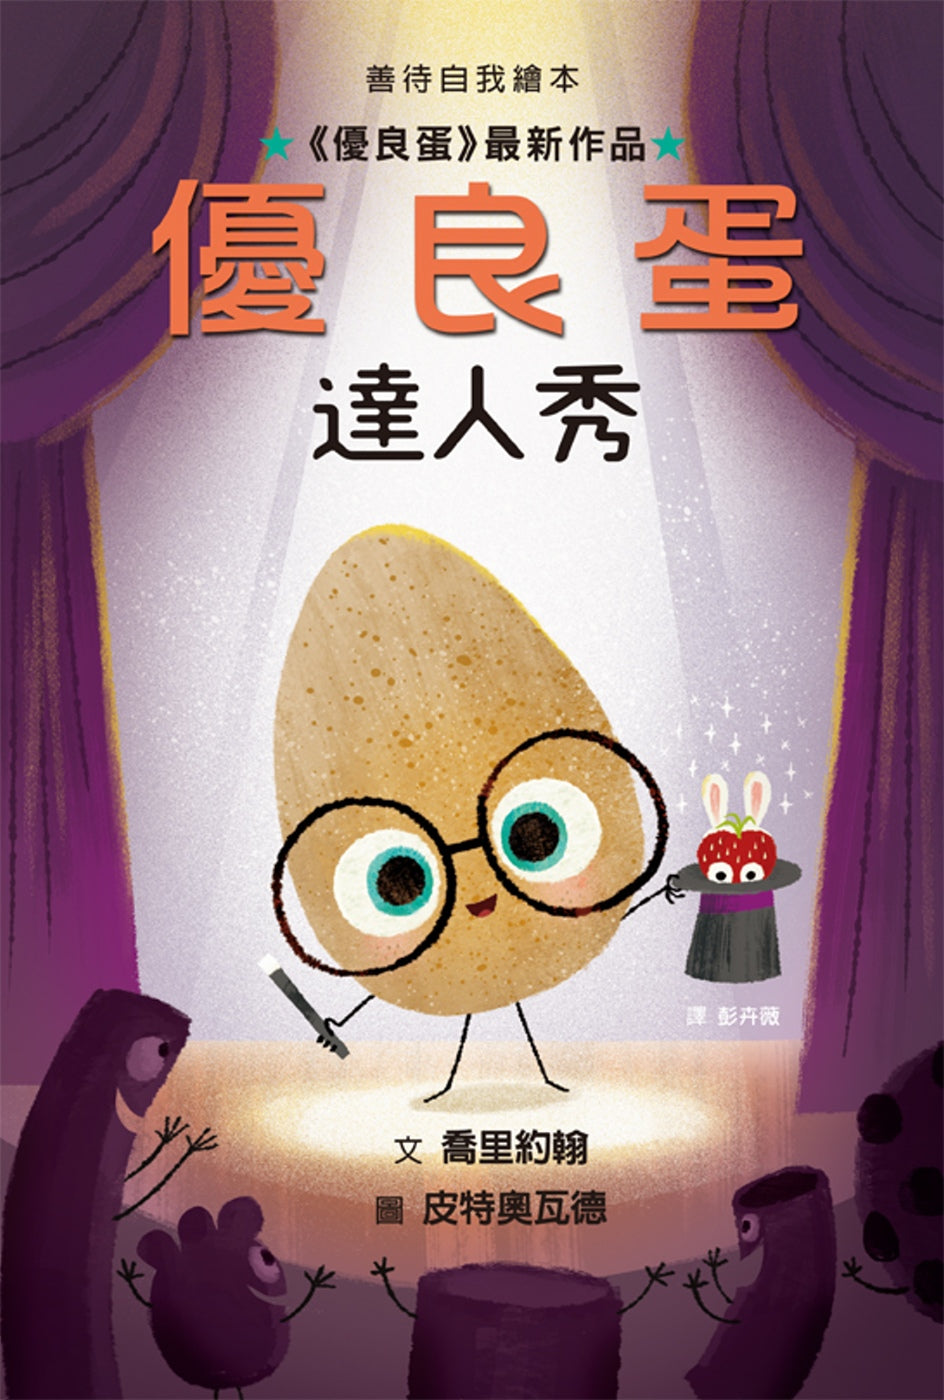 The Good Egg and the Talent Show • 優良蛋達人秀